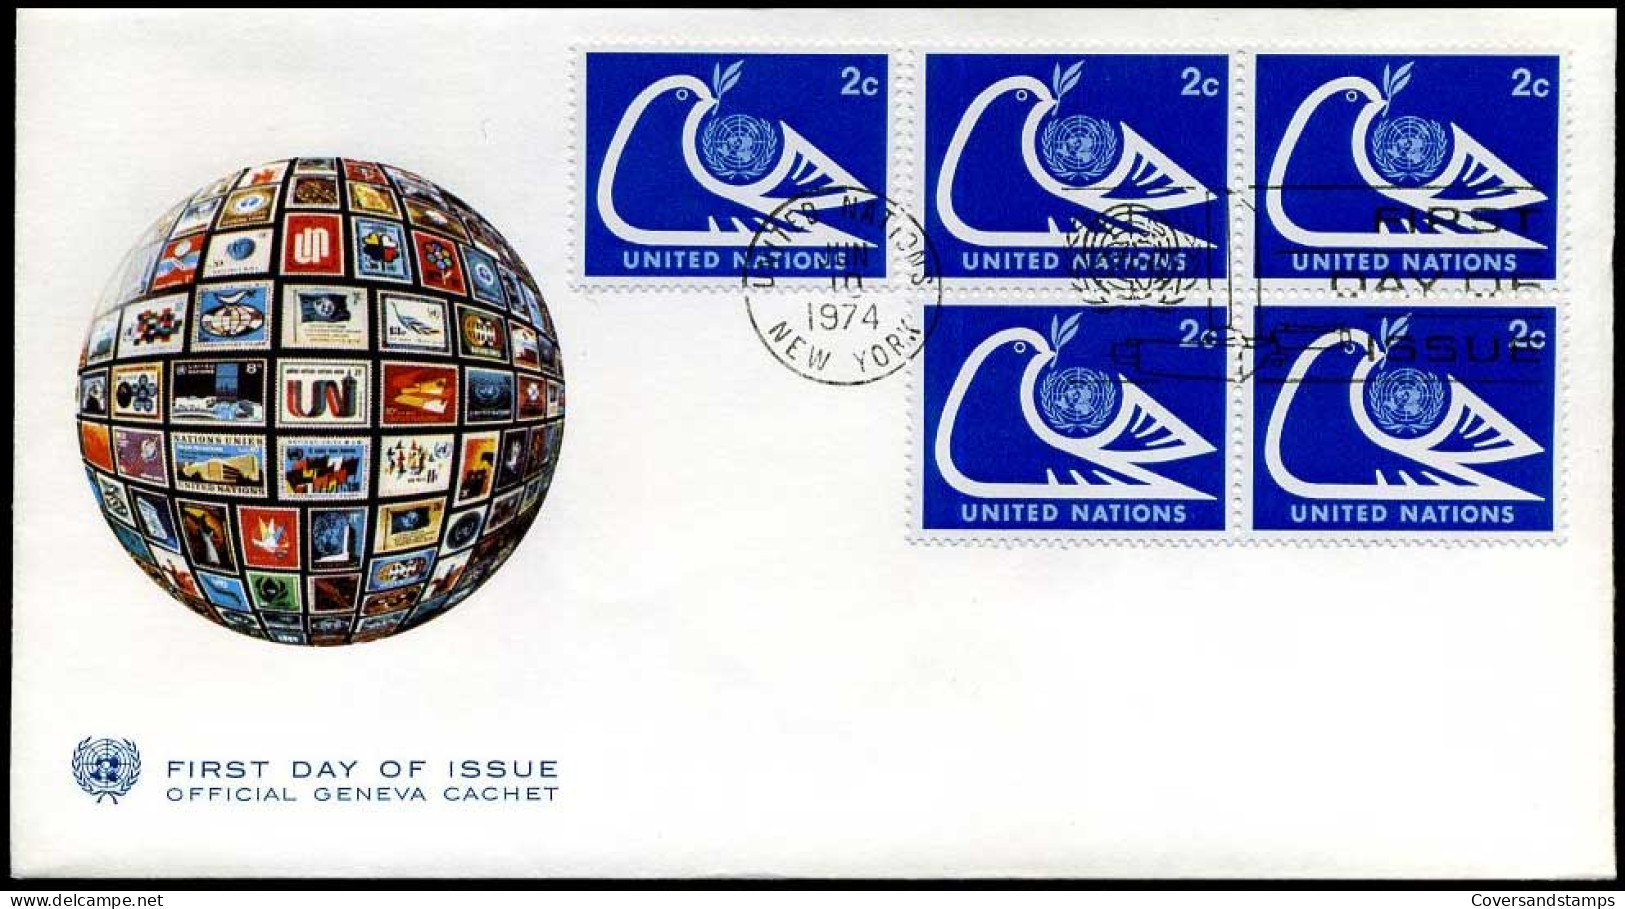 United Nations - FDC - Official Geneva Cachet - FDC